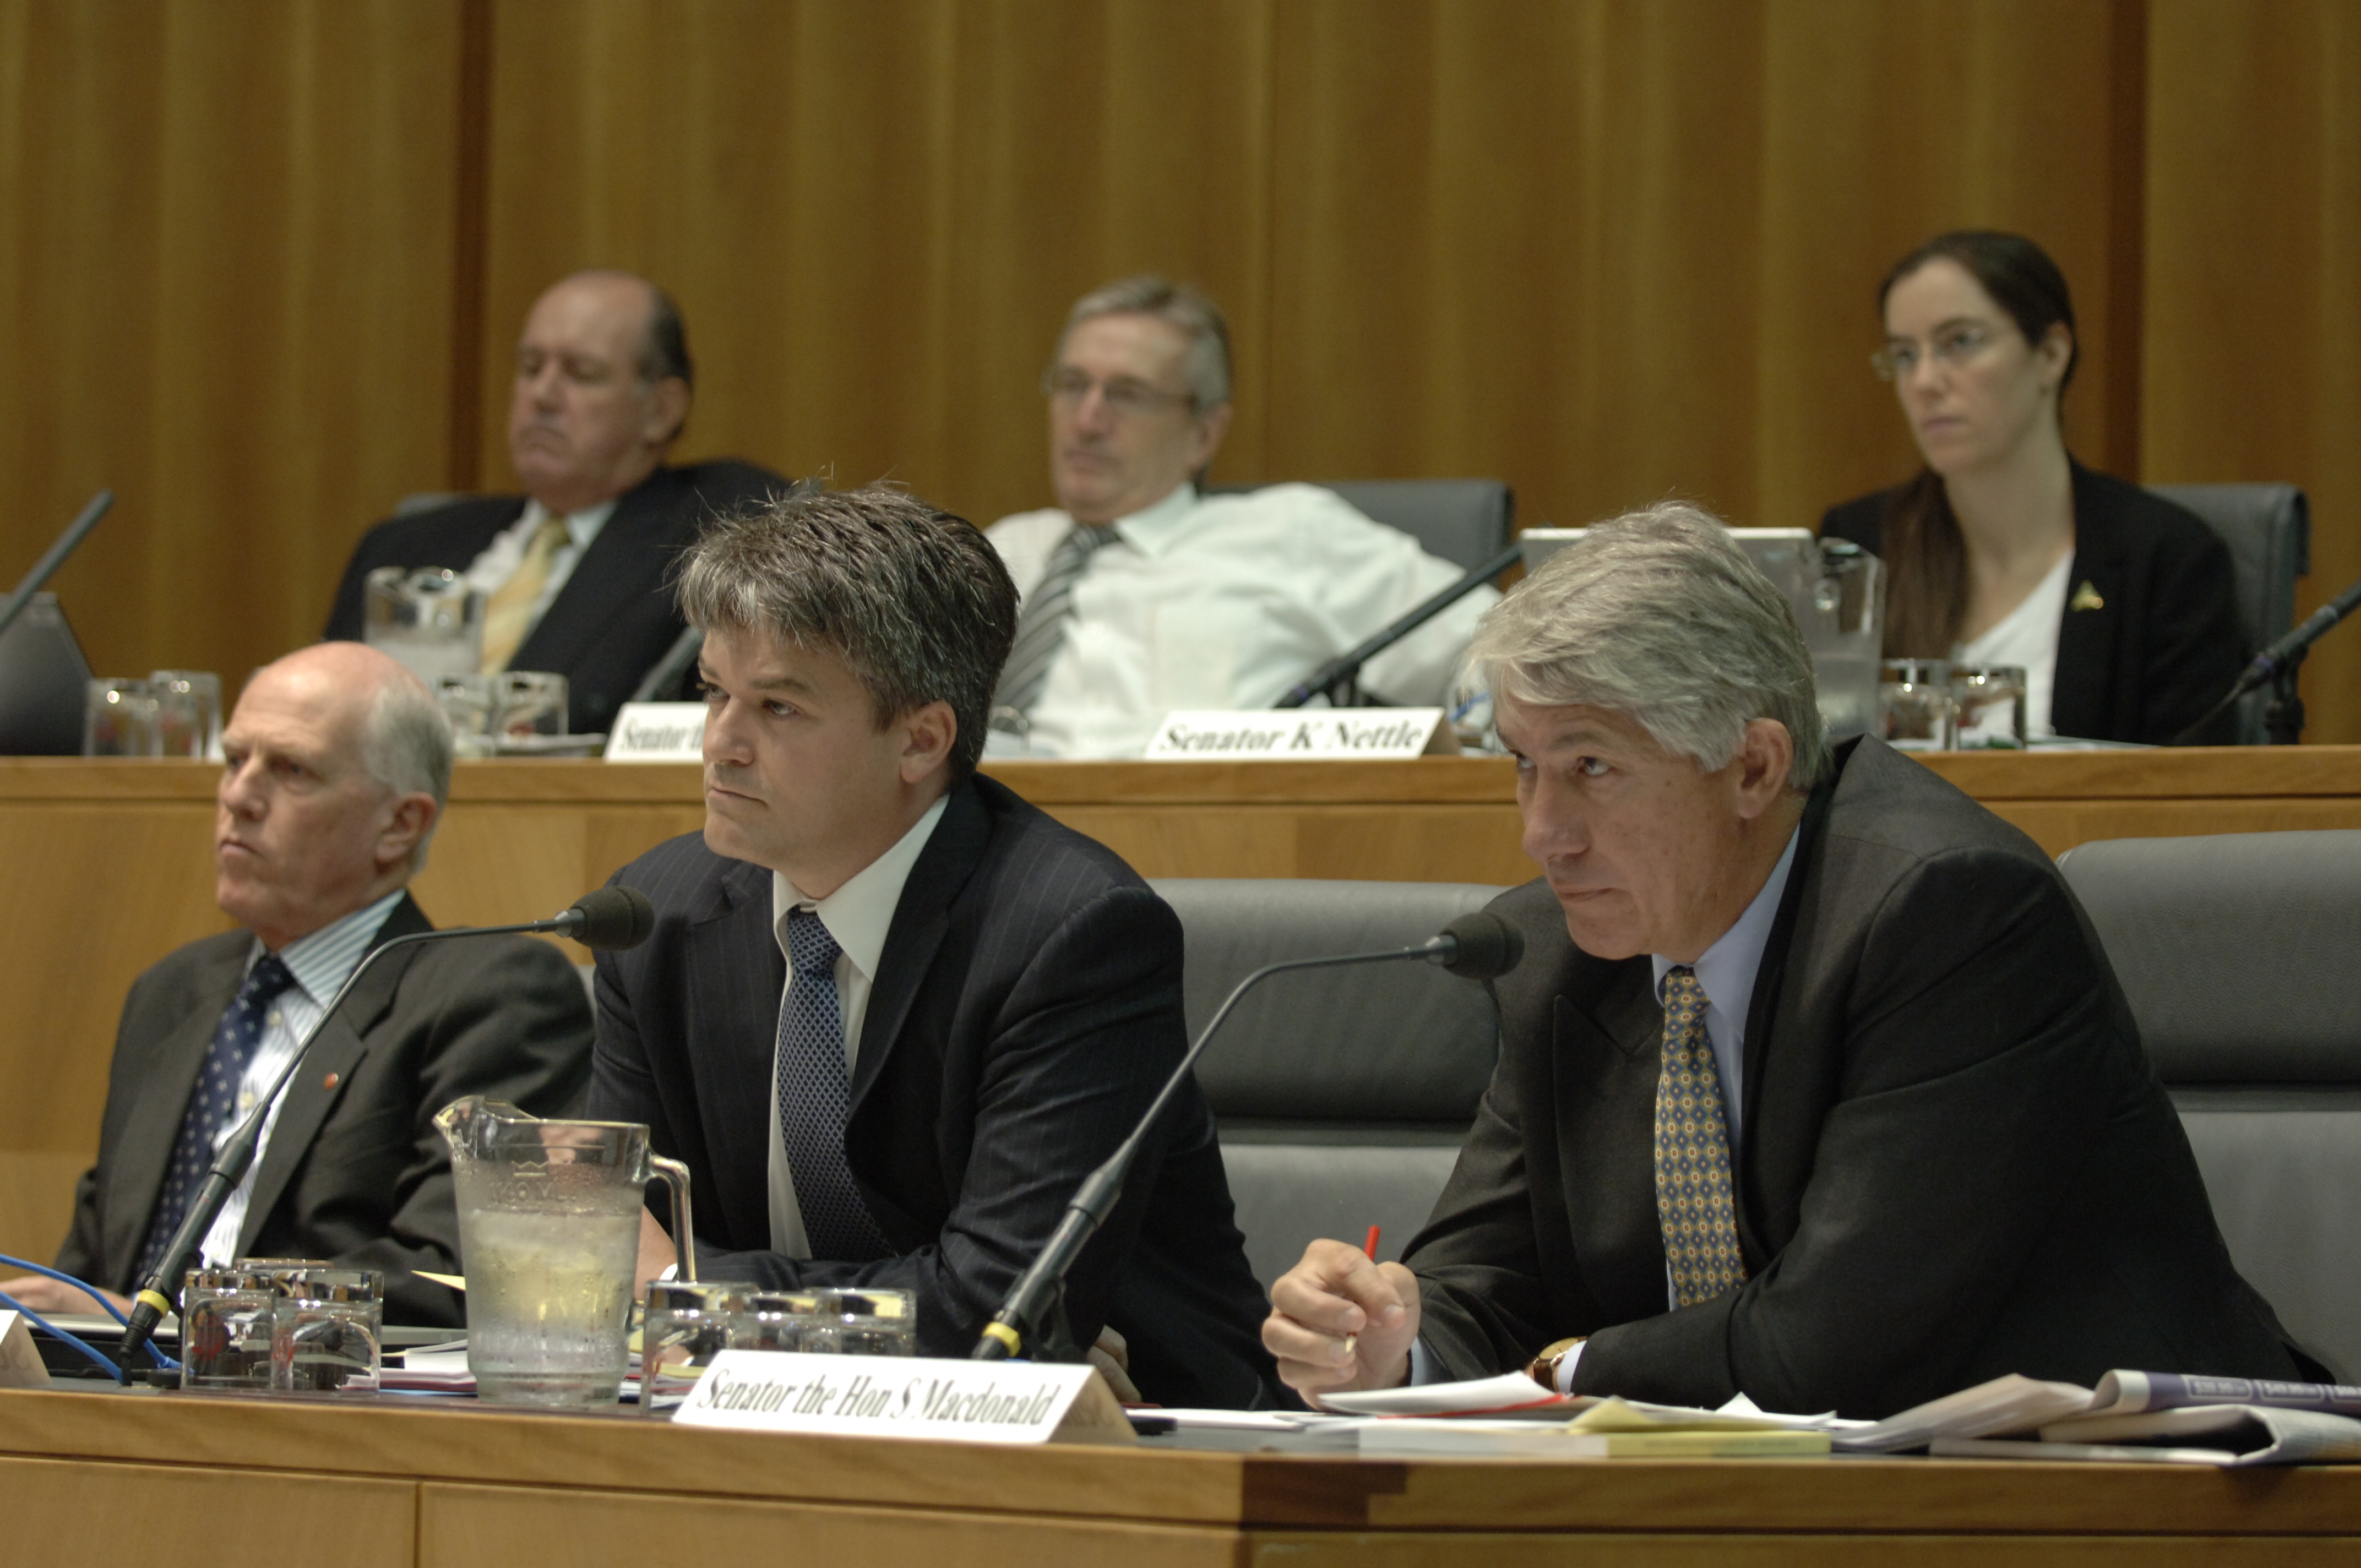 Standing Committee on Foreign Affairs, Defence and Trade at an additional estimates hearing, 20 February 2008. Top row L-R: Senators David Johnston, Nick Minchin and Kerry Nettle. Bottom row L-R: Senators Russell Trood [Deputy Chair], Mathias Cormann and Sandy Macdonald. DPS Auspic.